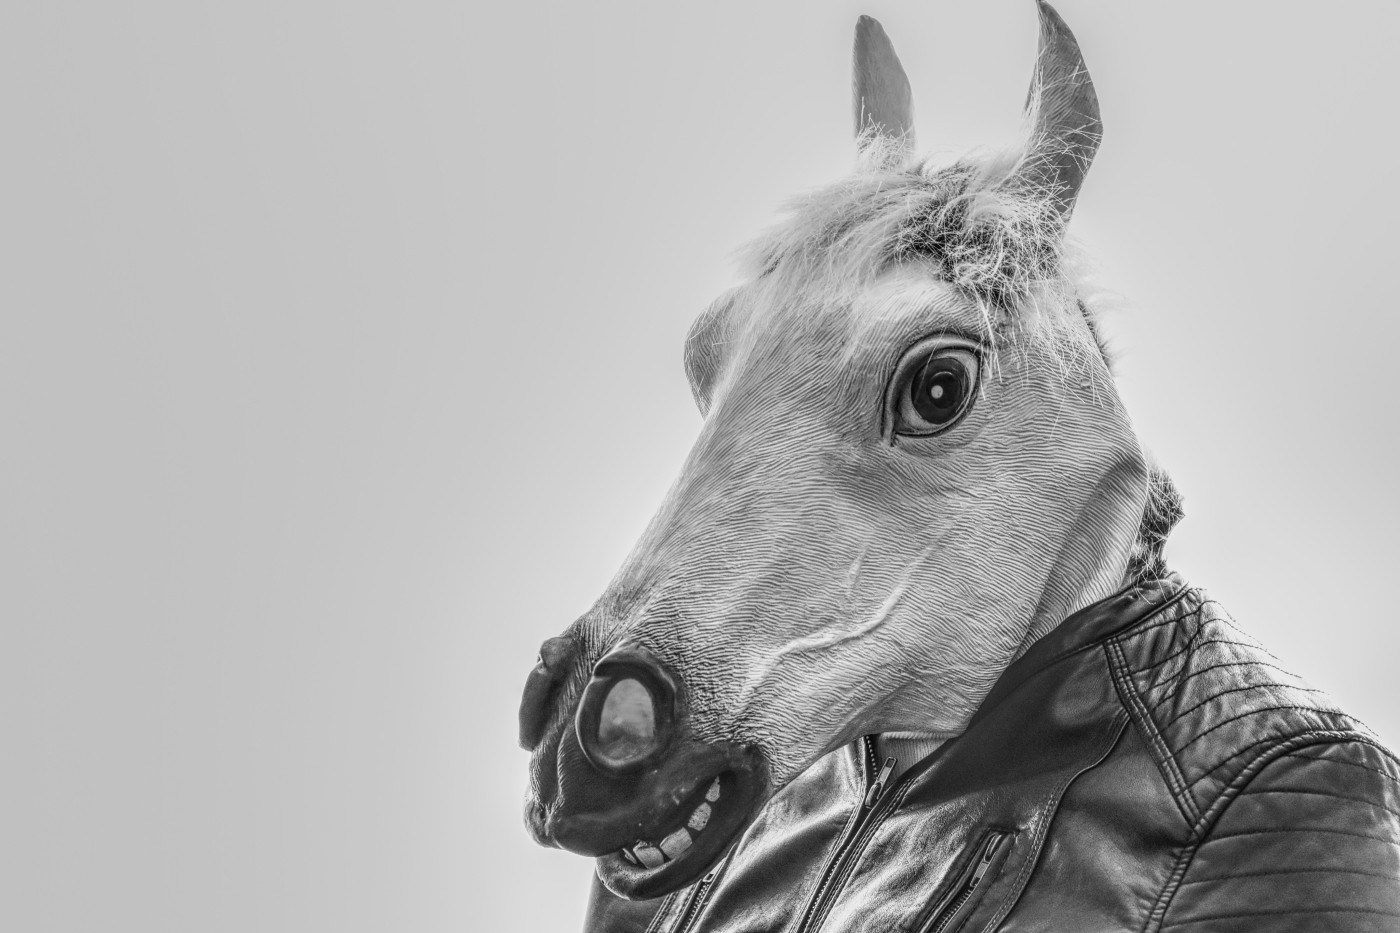 Black and white image of a white horse in a black leather jacket